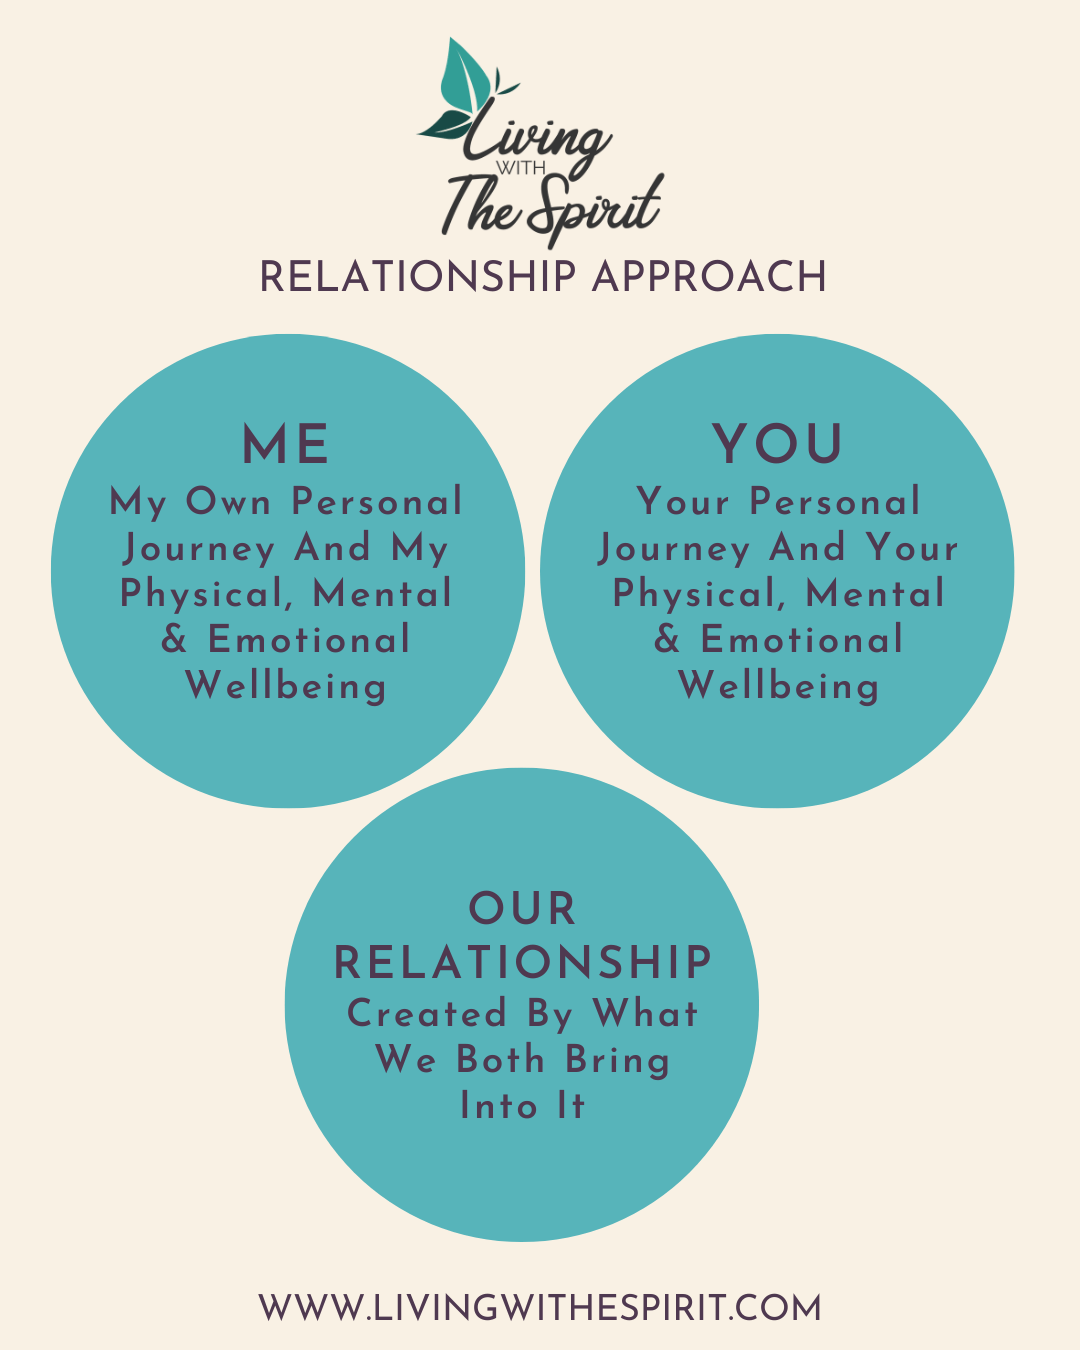 Our Relationship Approach- Living with The Spirit